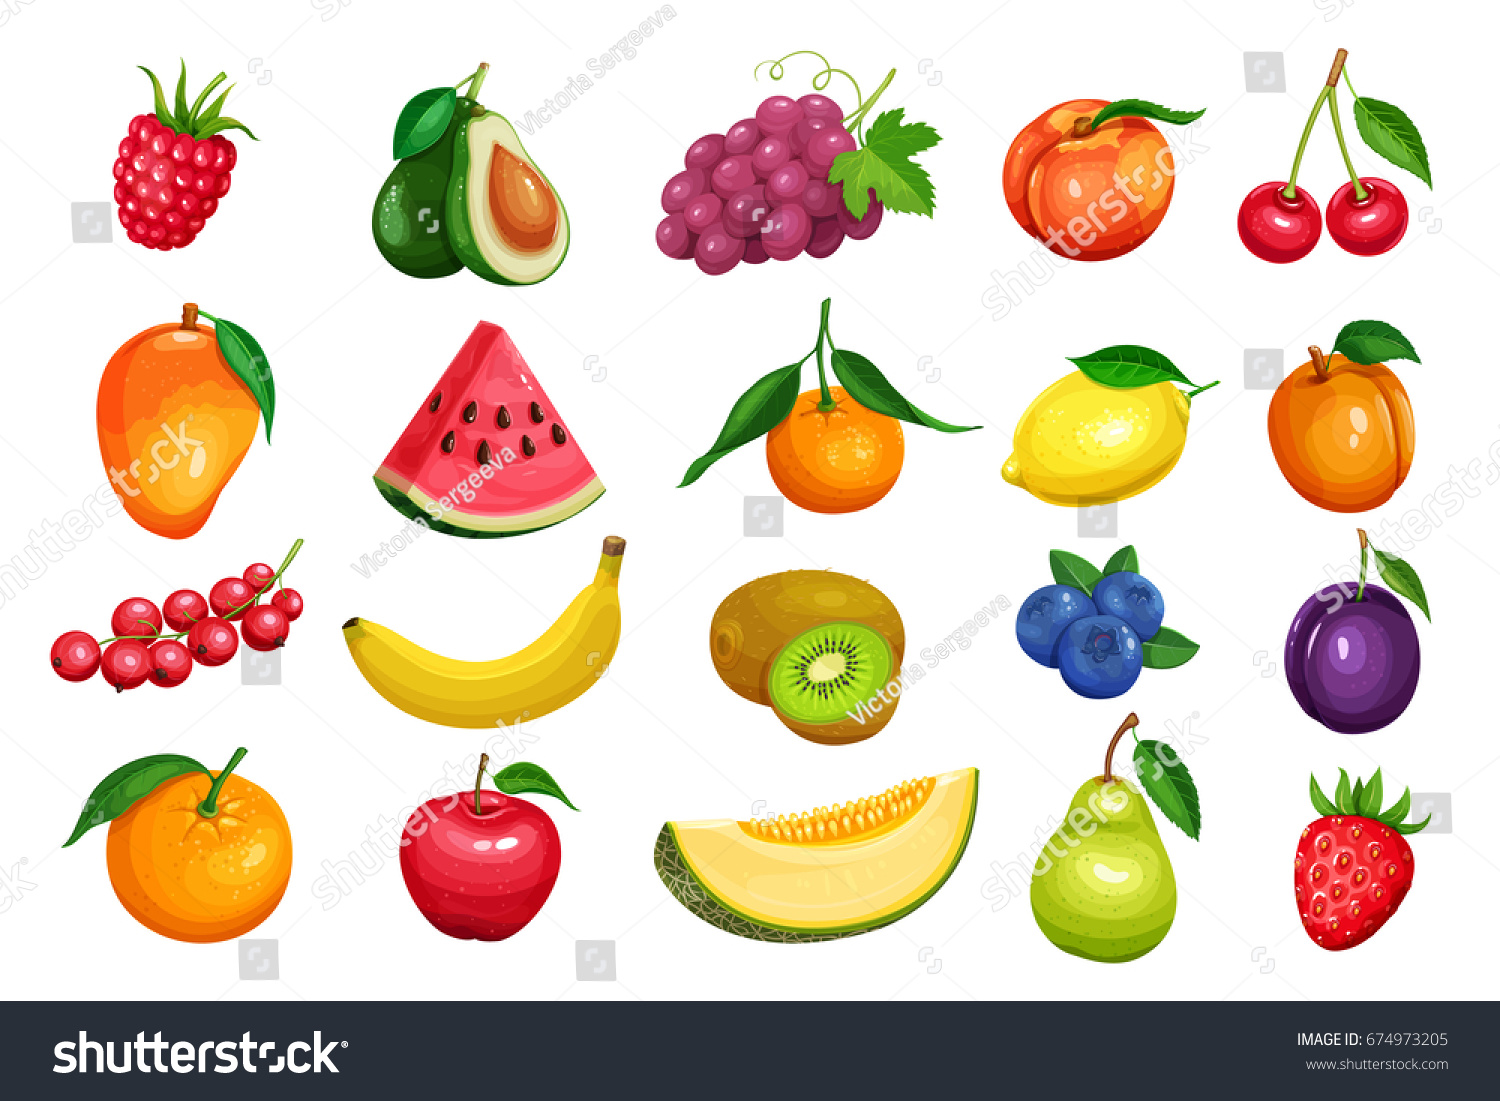 Raspberries, strawberries, grapes, currants and blueberries. Lemon, peach, apple, pear, orange watermelon avocado and melon set Vector illustration berries and fruits in cartoon style. #674973205